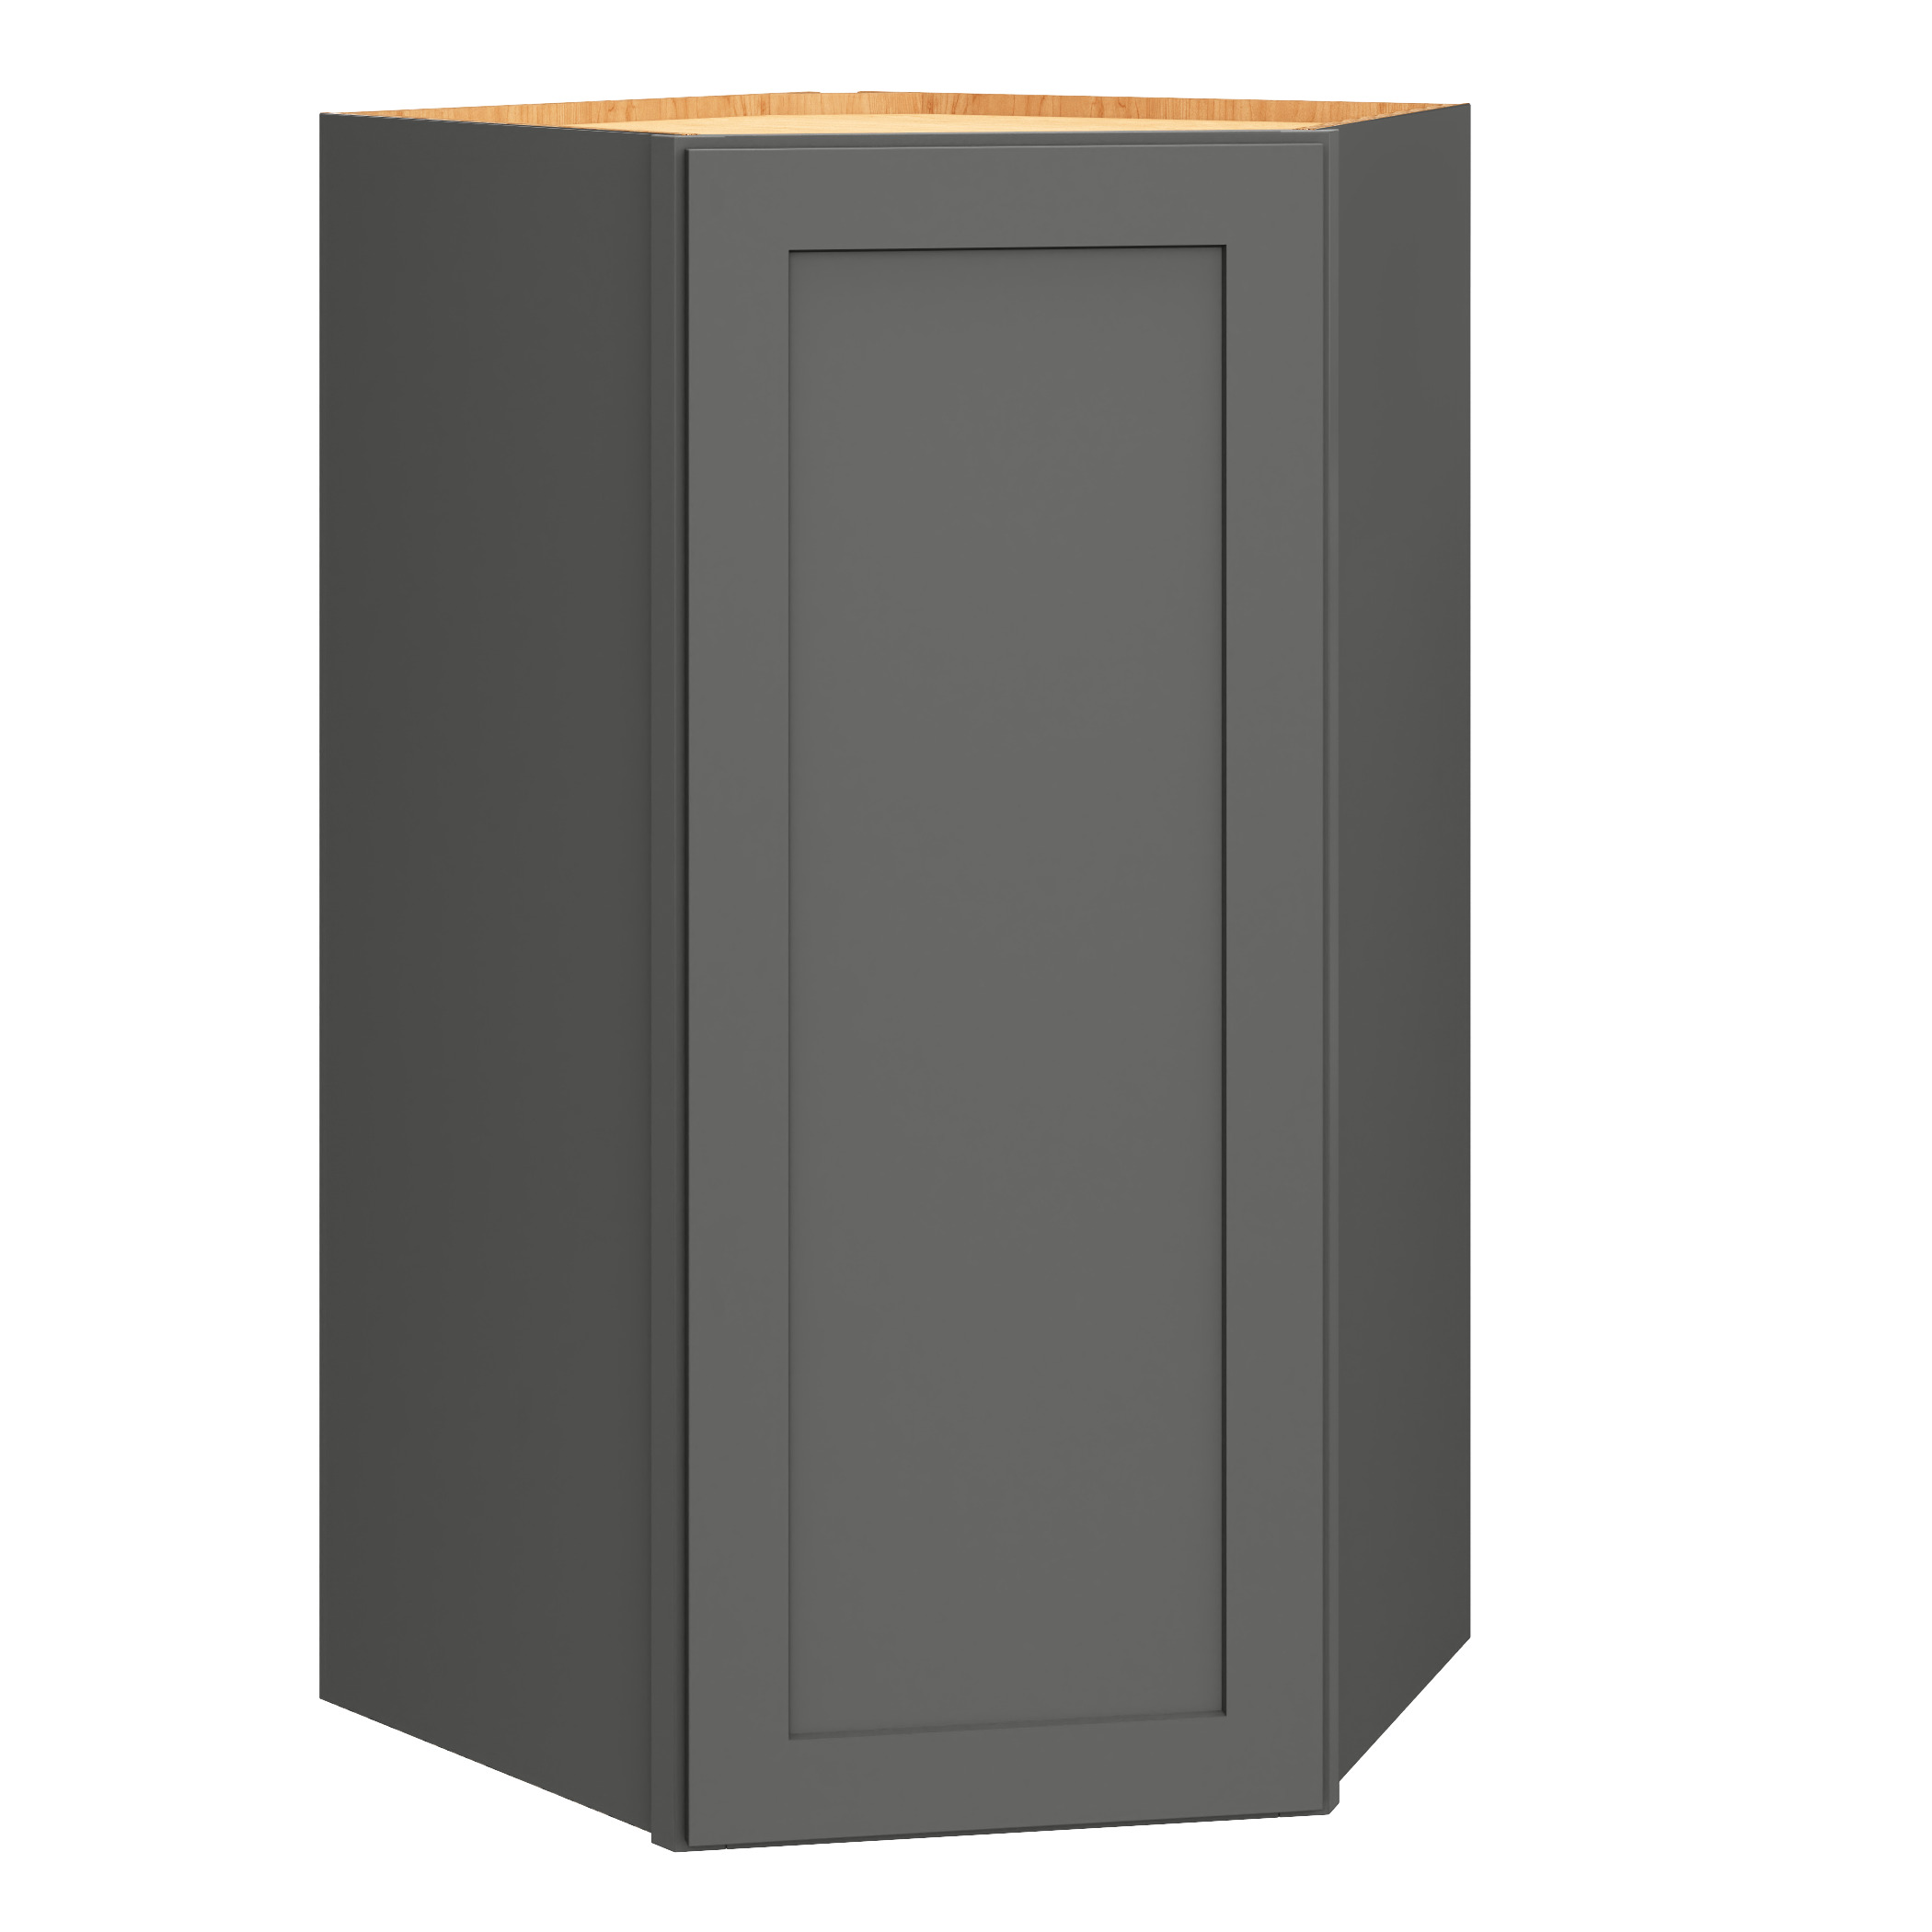 Diagonal Wall Cabinet in Graphite